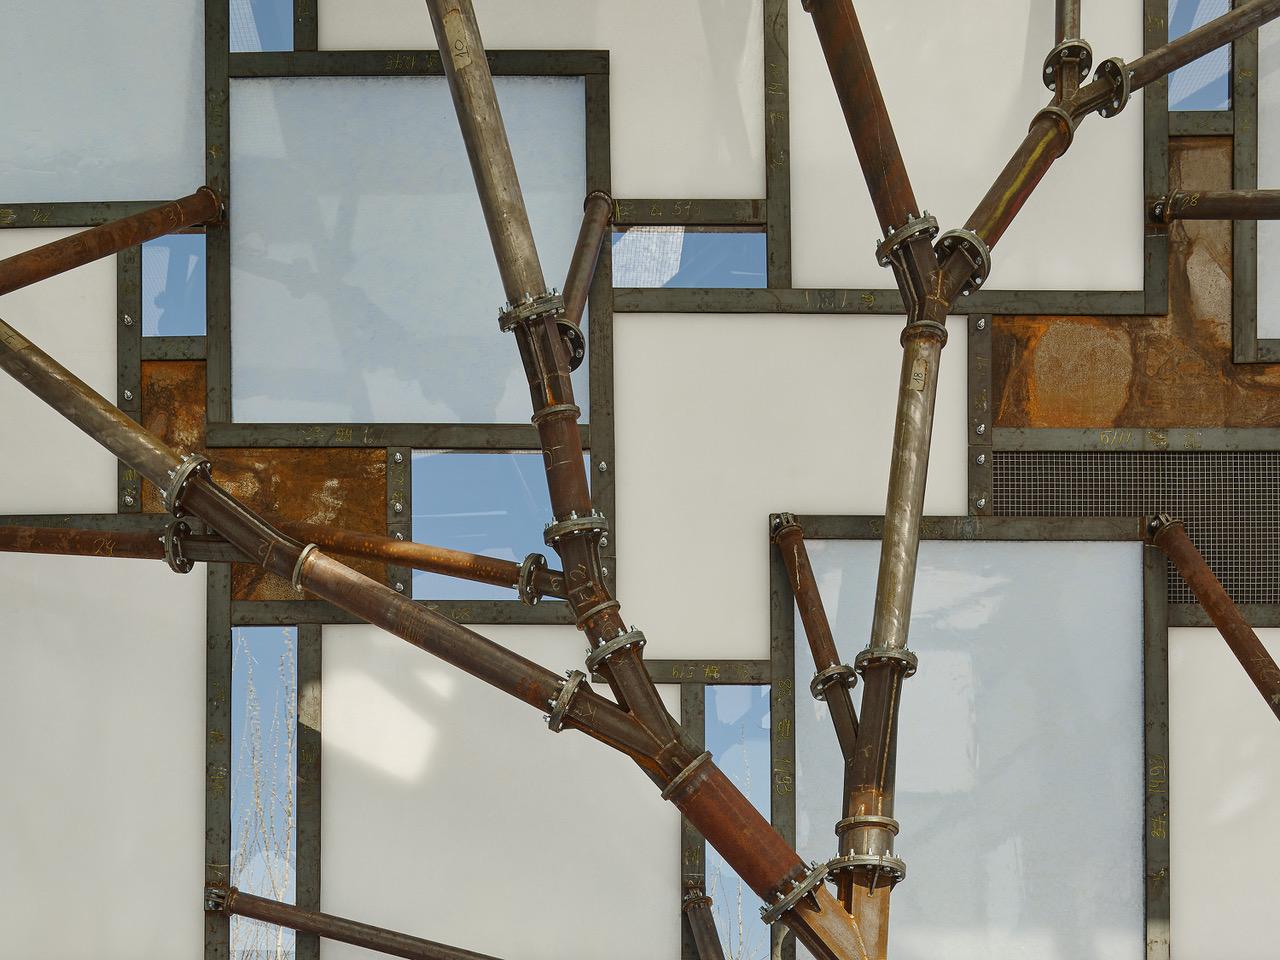 blue, white, and brown stained glass behind metal branch construction